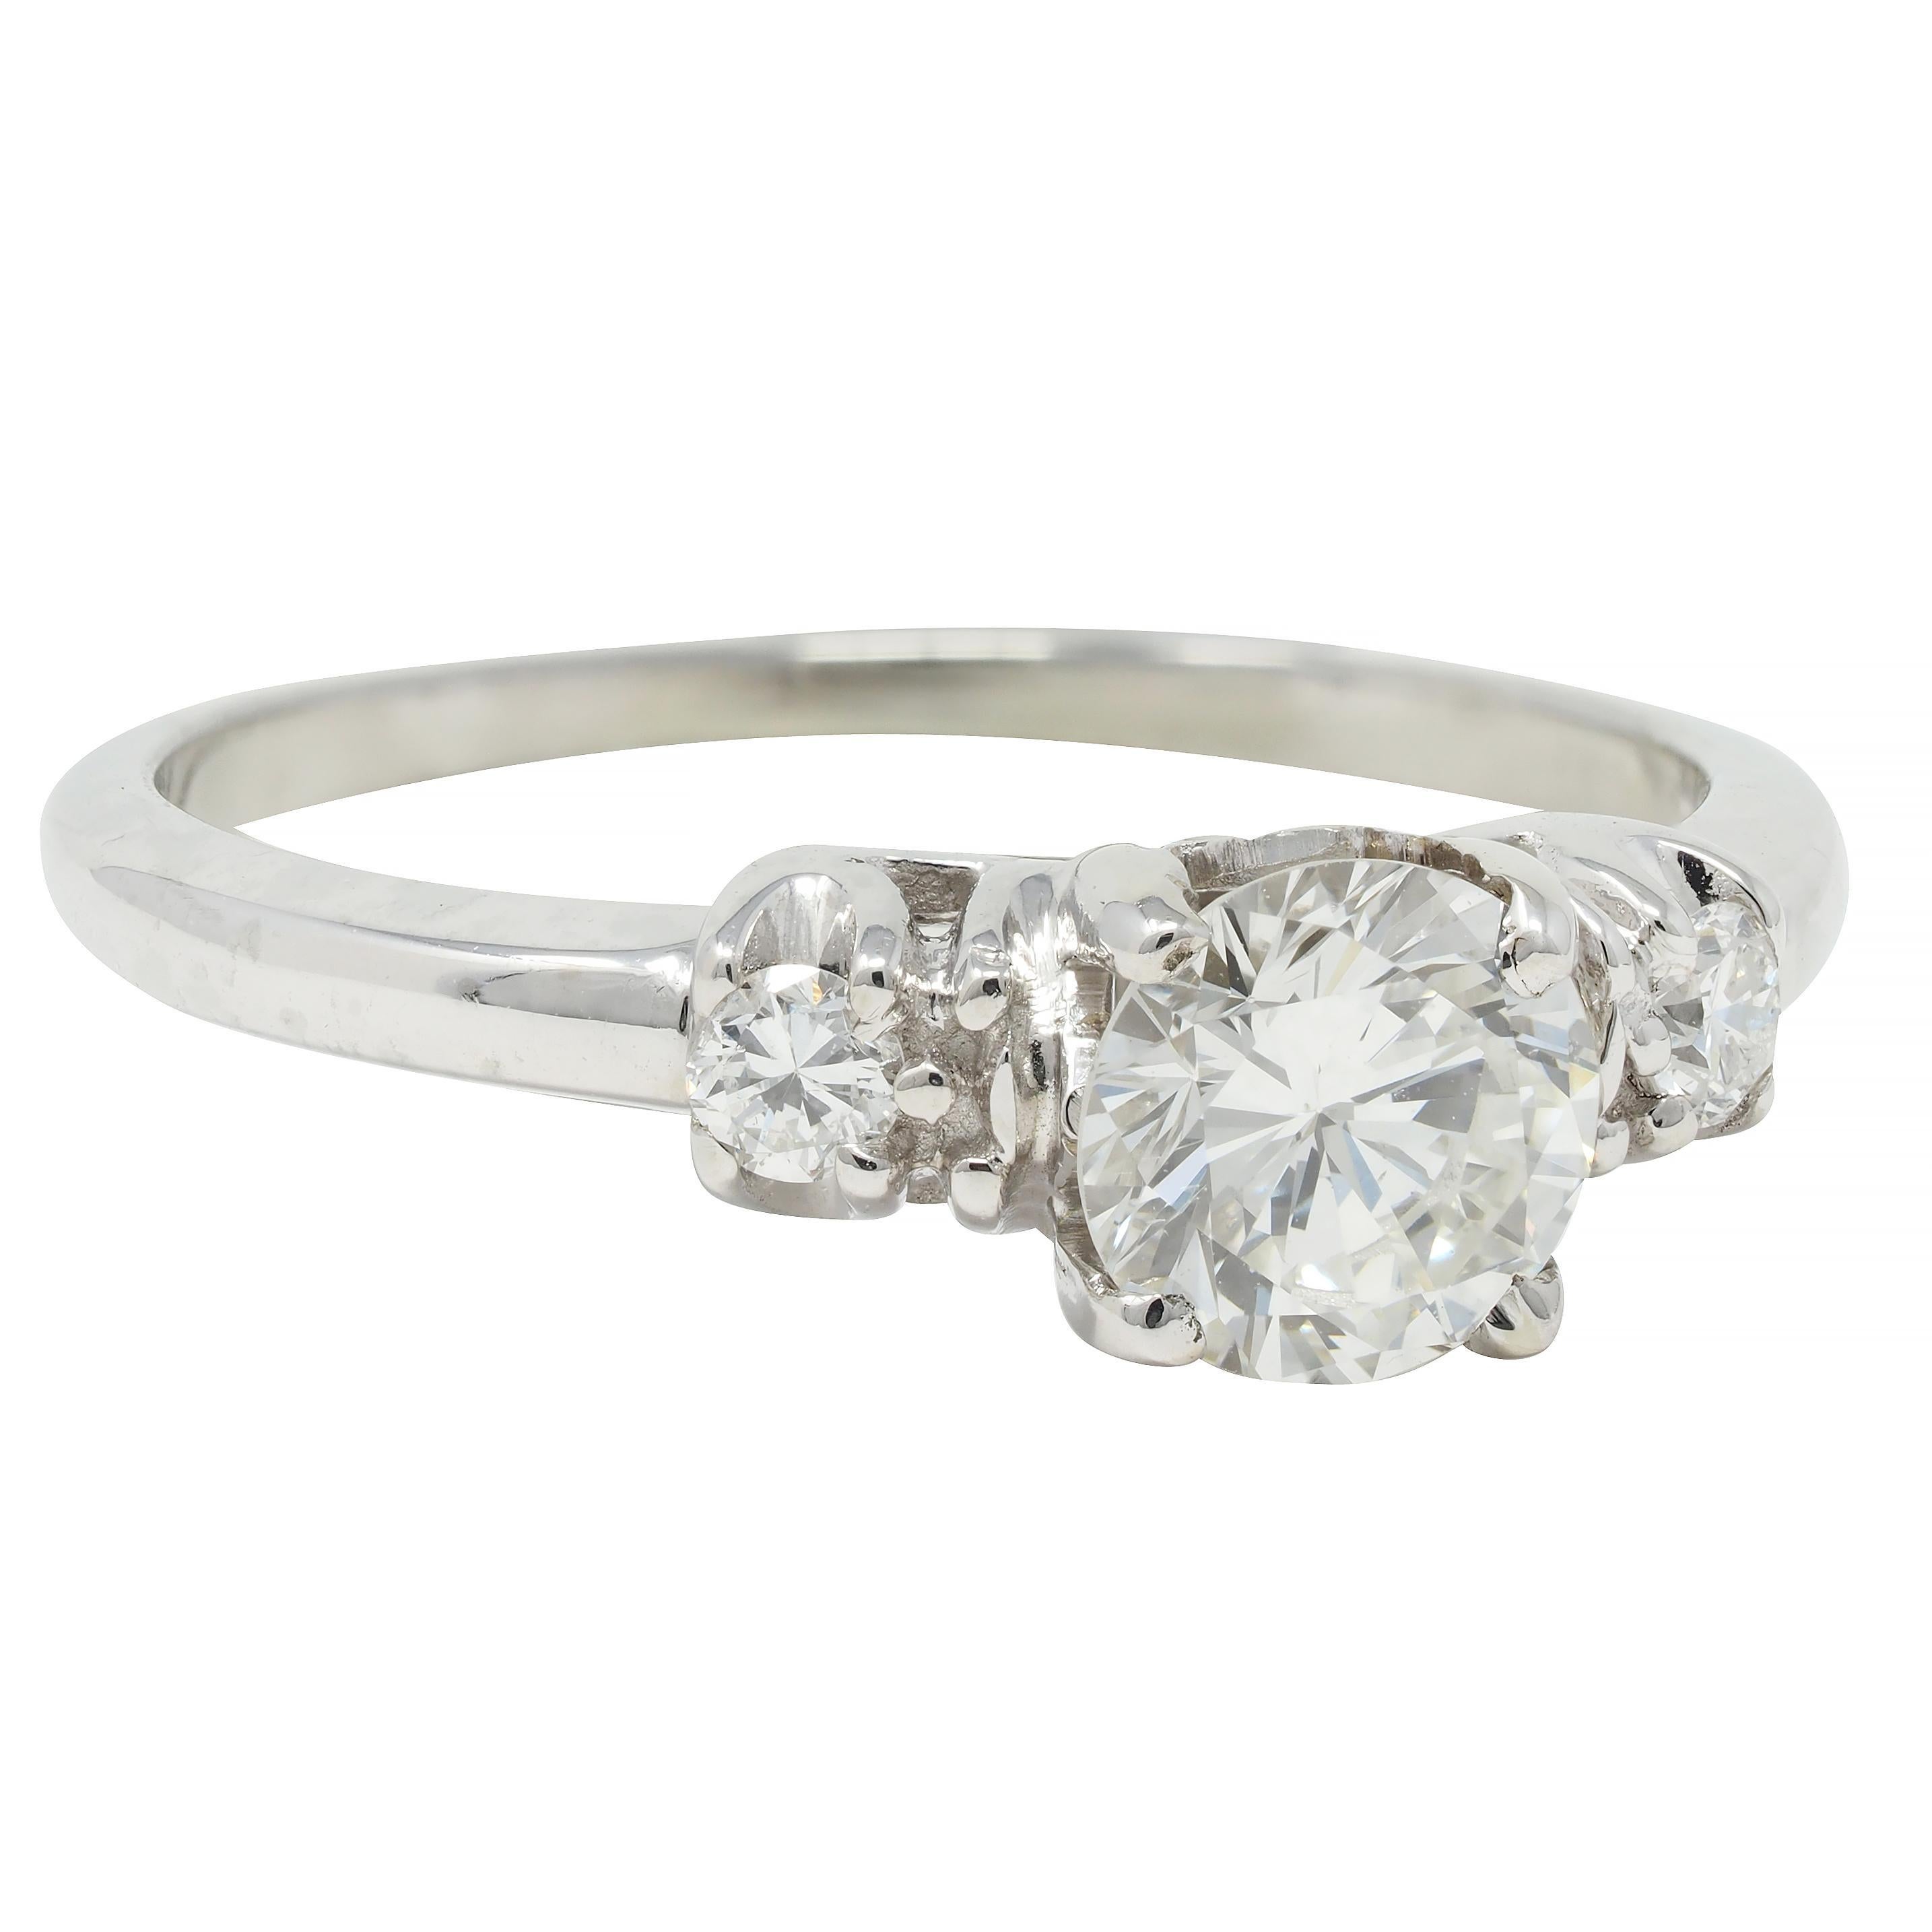 Centering a transitional cut diamond weighing approximately 0.59 carat total - G color with VS2 clarity
Prong set in a pierced arch motif basket and flanked by additional transitional cut diamonds 
Weighing approximately 0.06 carat total - eye clean